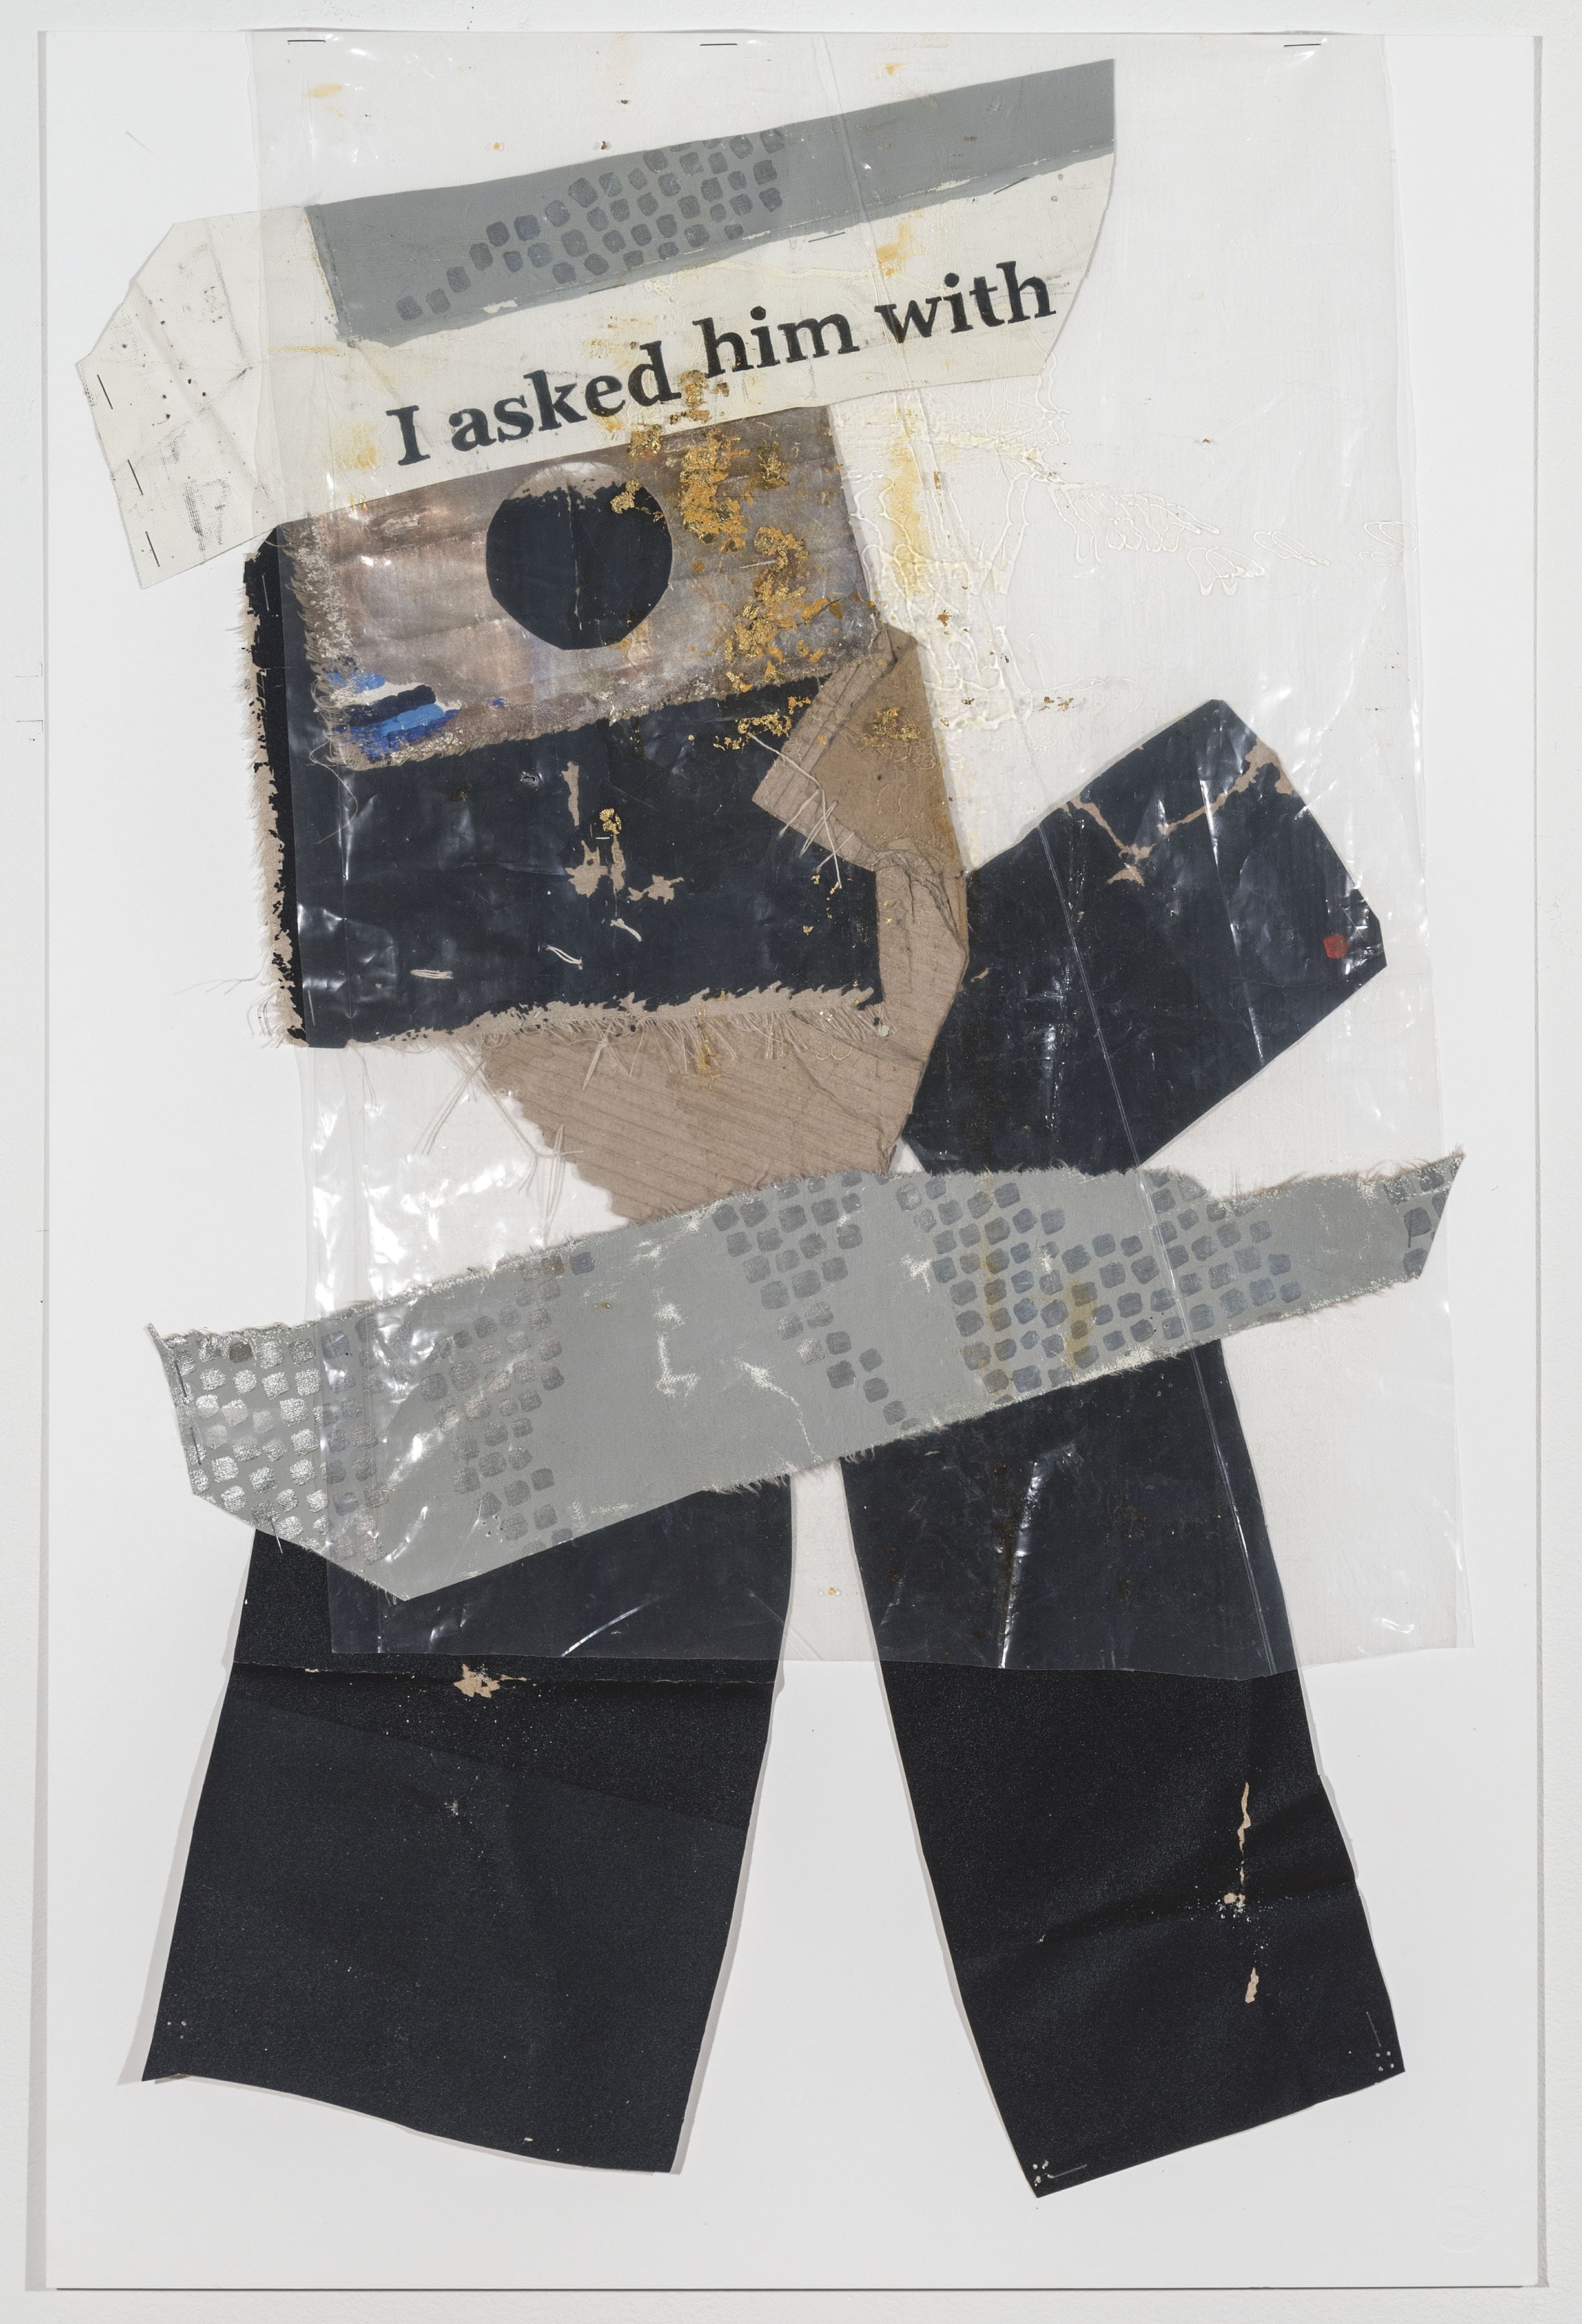  Memory I, #47  2018   Collage salvaged fragments of oil on primed linen, thread, cardboard, staples and 23K gold on plastic on museum board   30” x 20”  